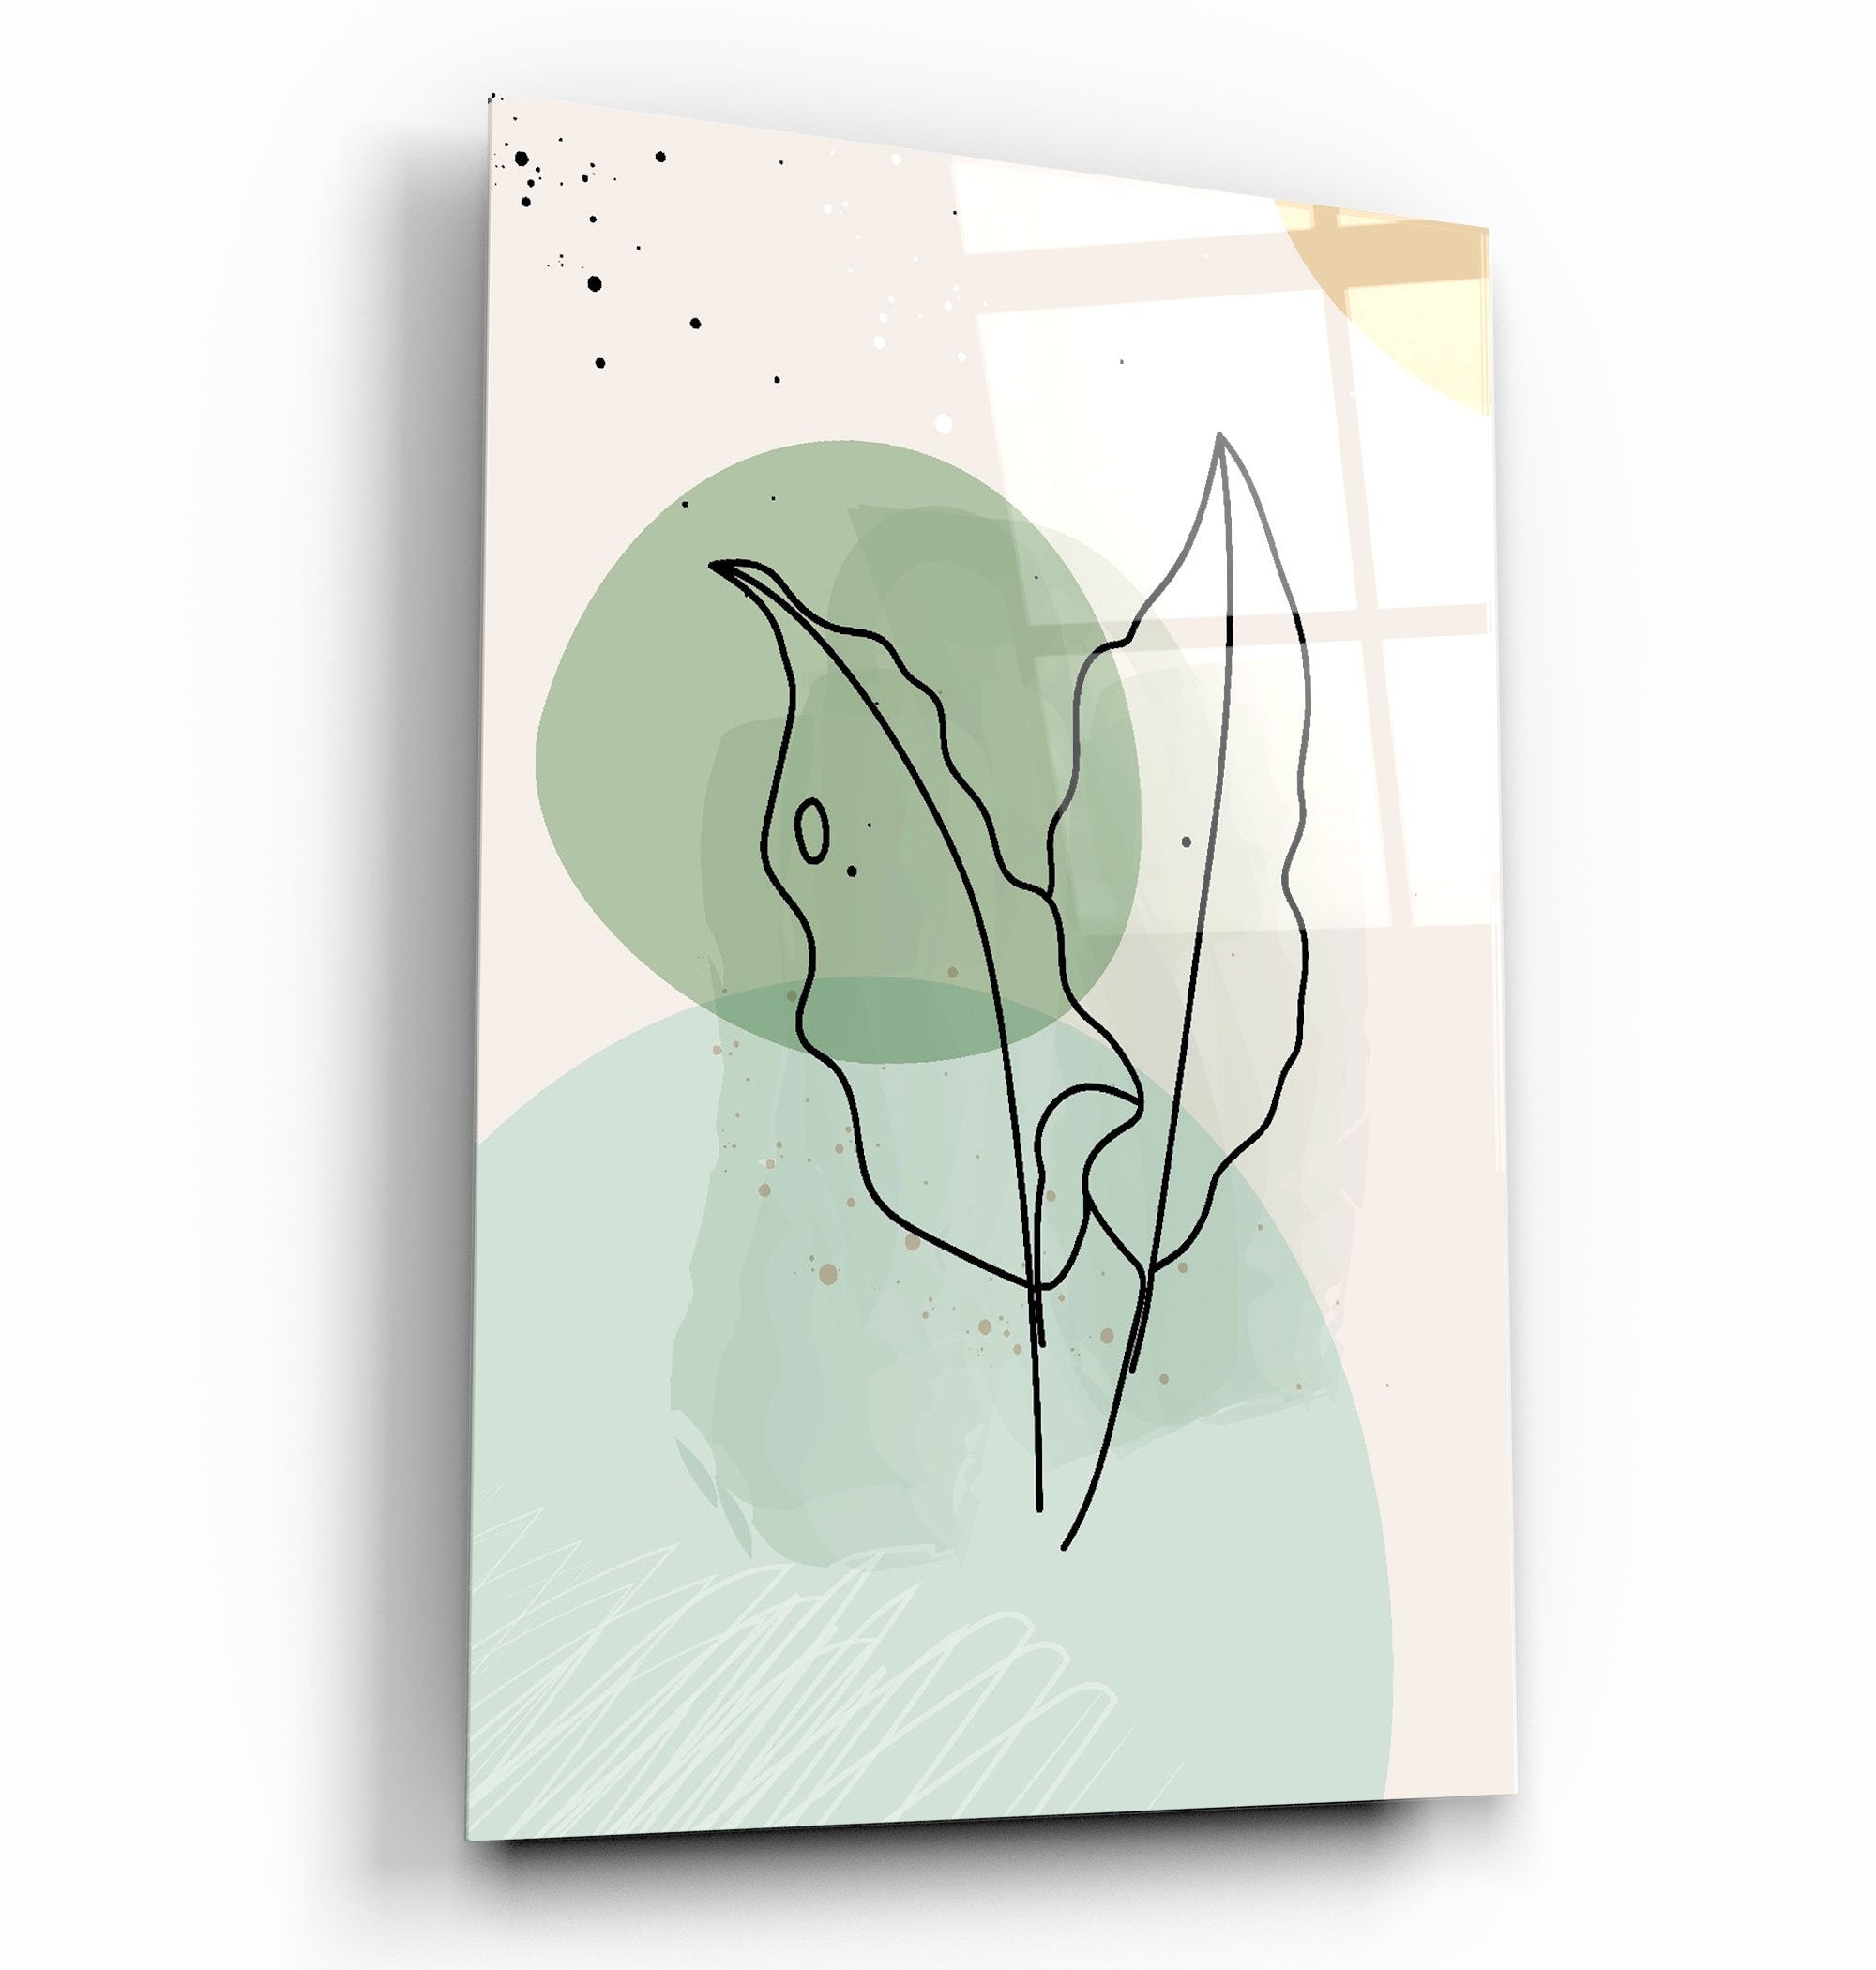 ・"Abstract Shapes and Leaves V1"・Glass Wall Art